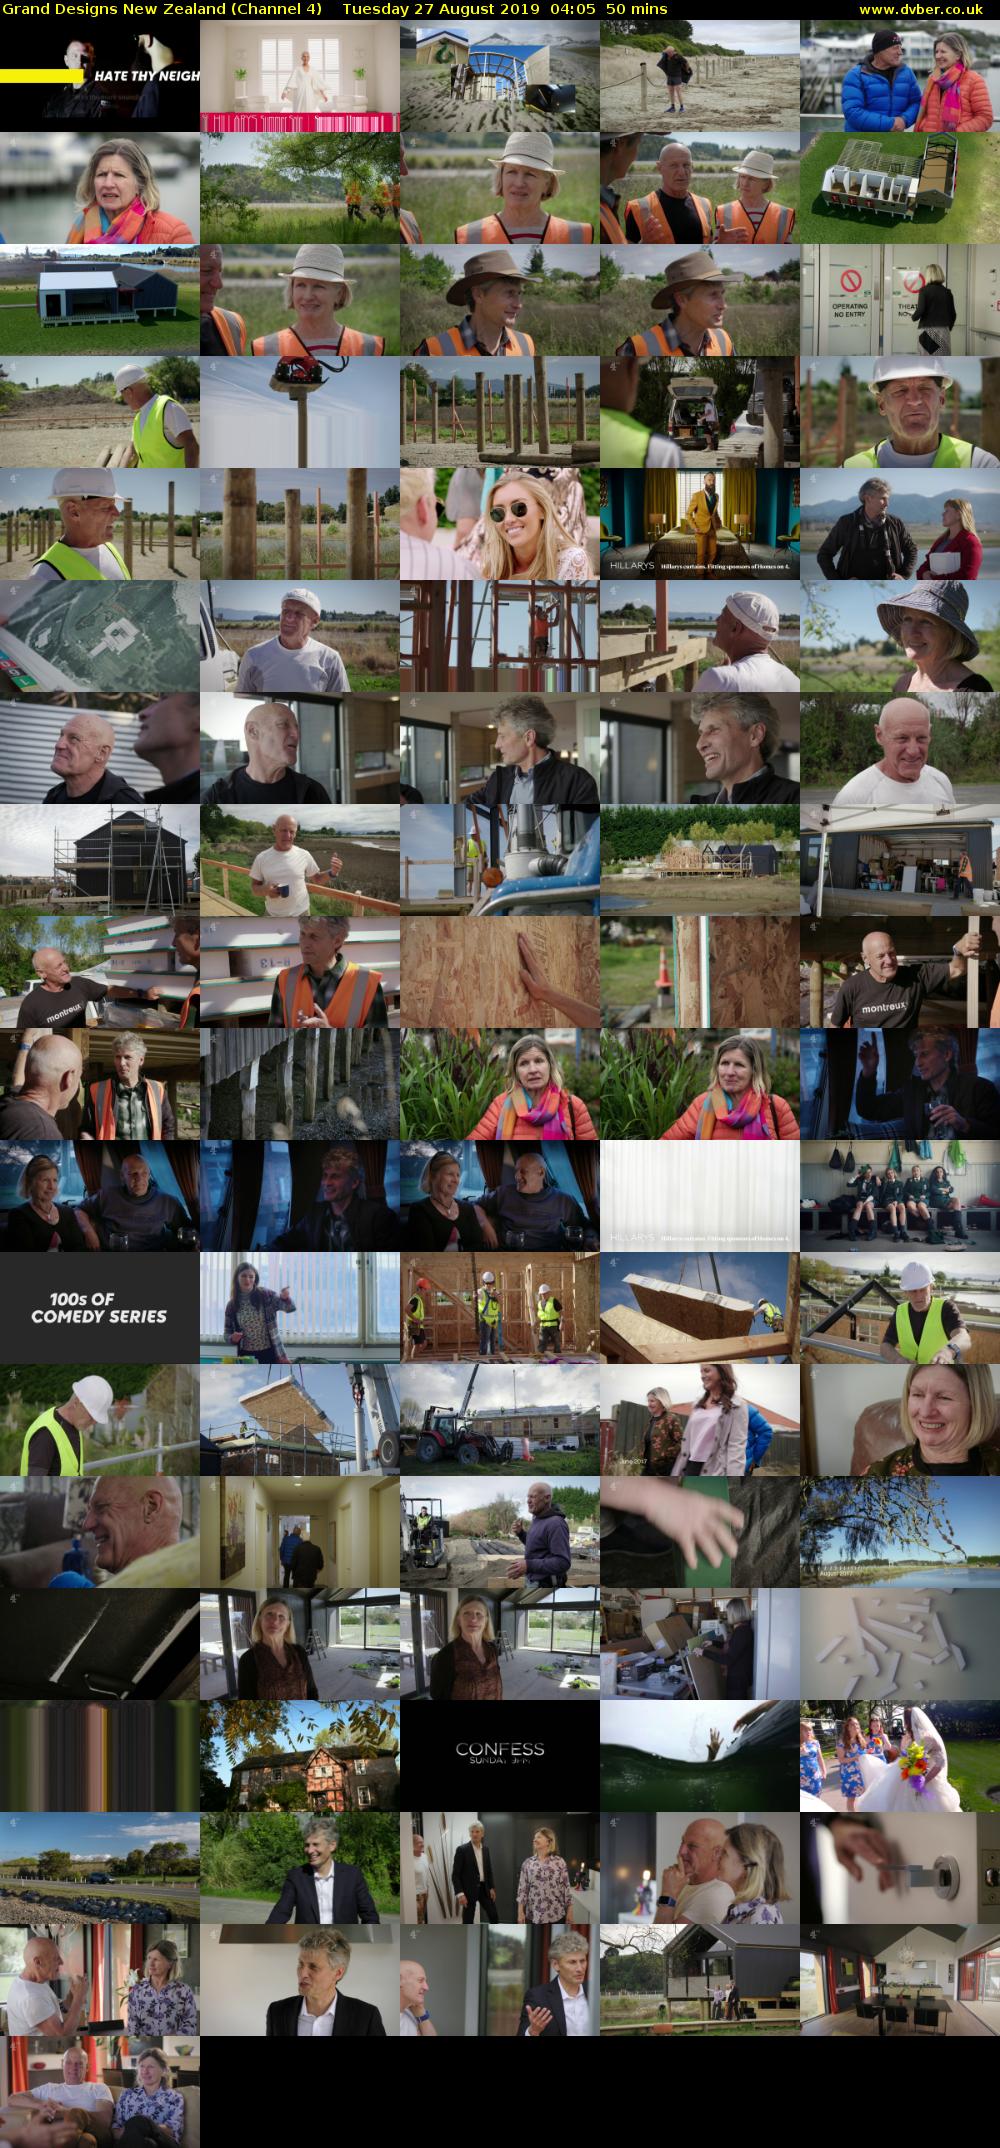 Grand Designs New Zealand (Channel 4) Tuesday 27 August 2019 04:05 - 04:55